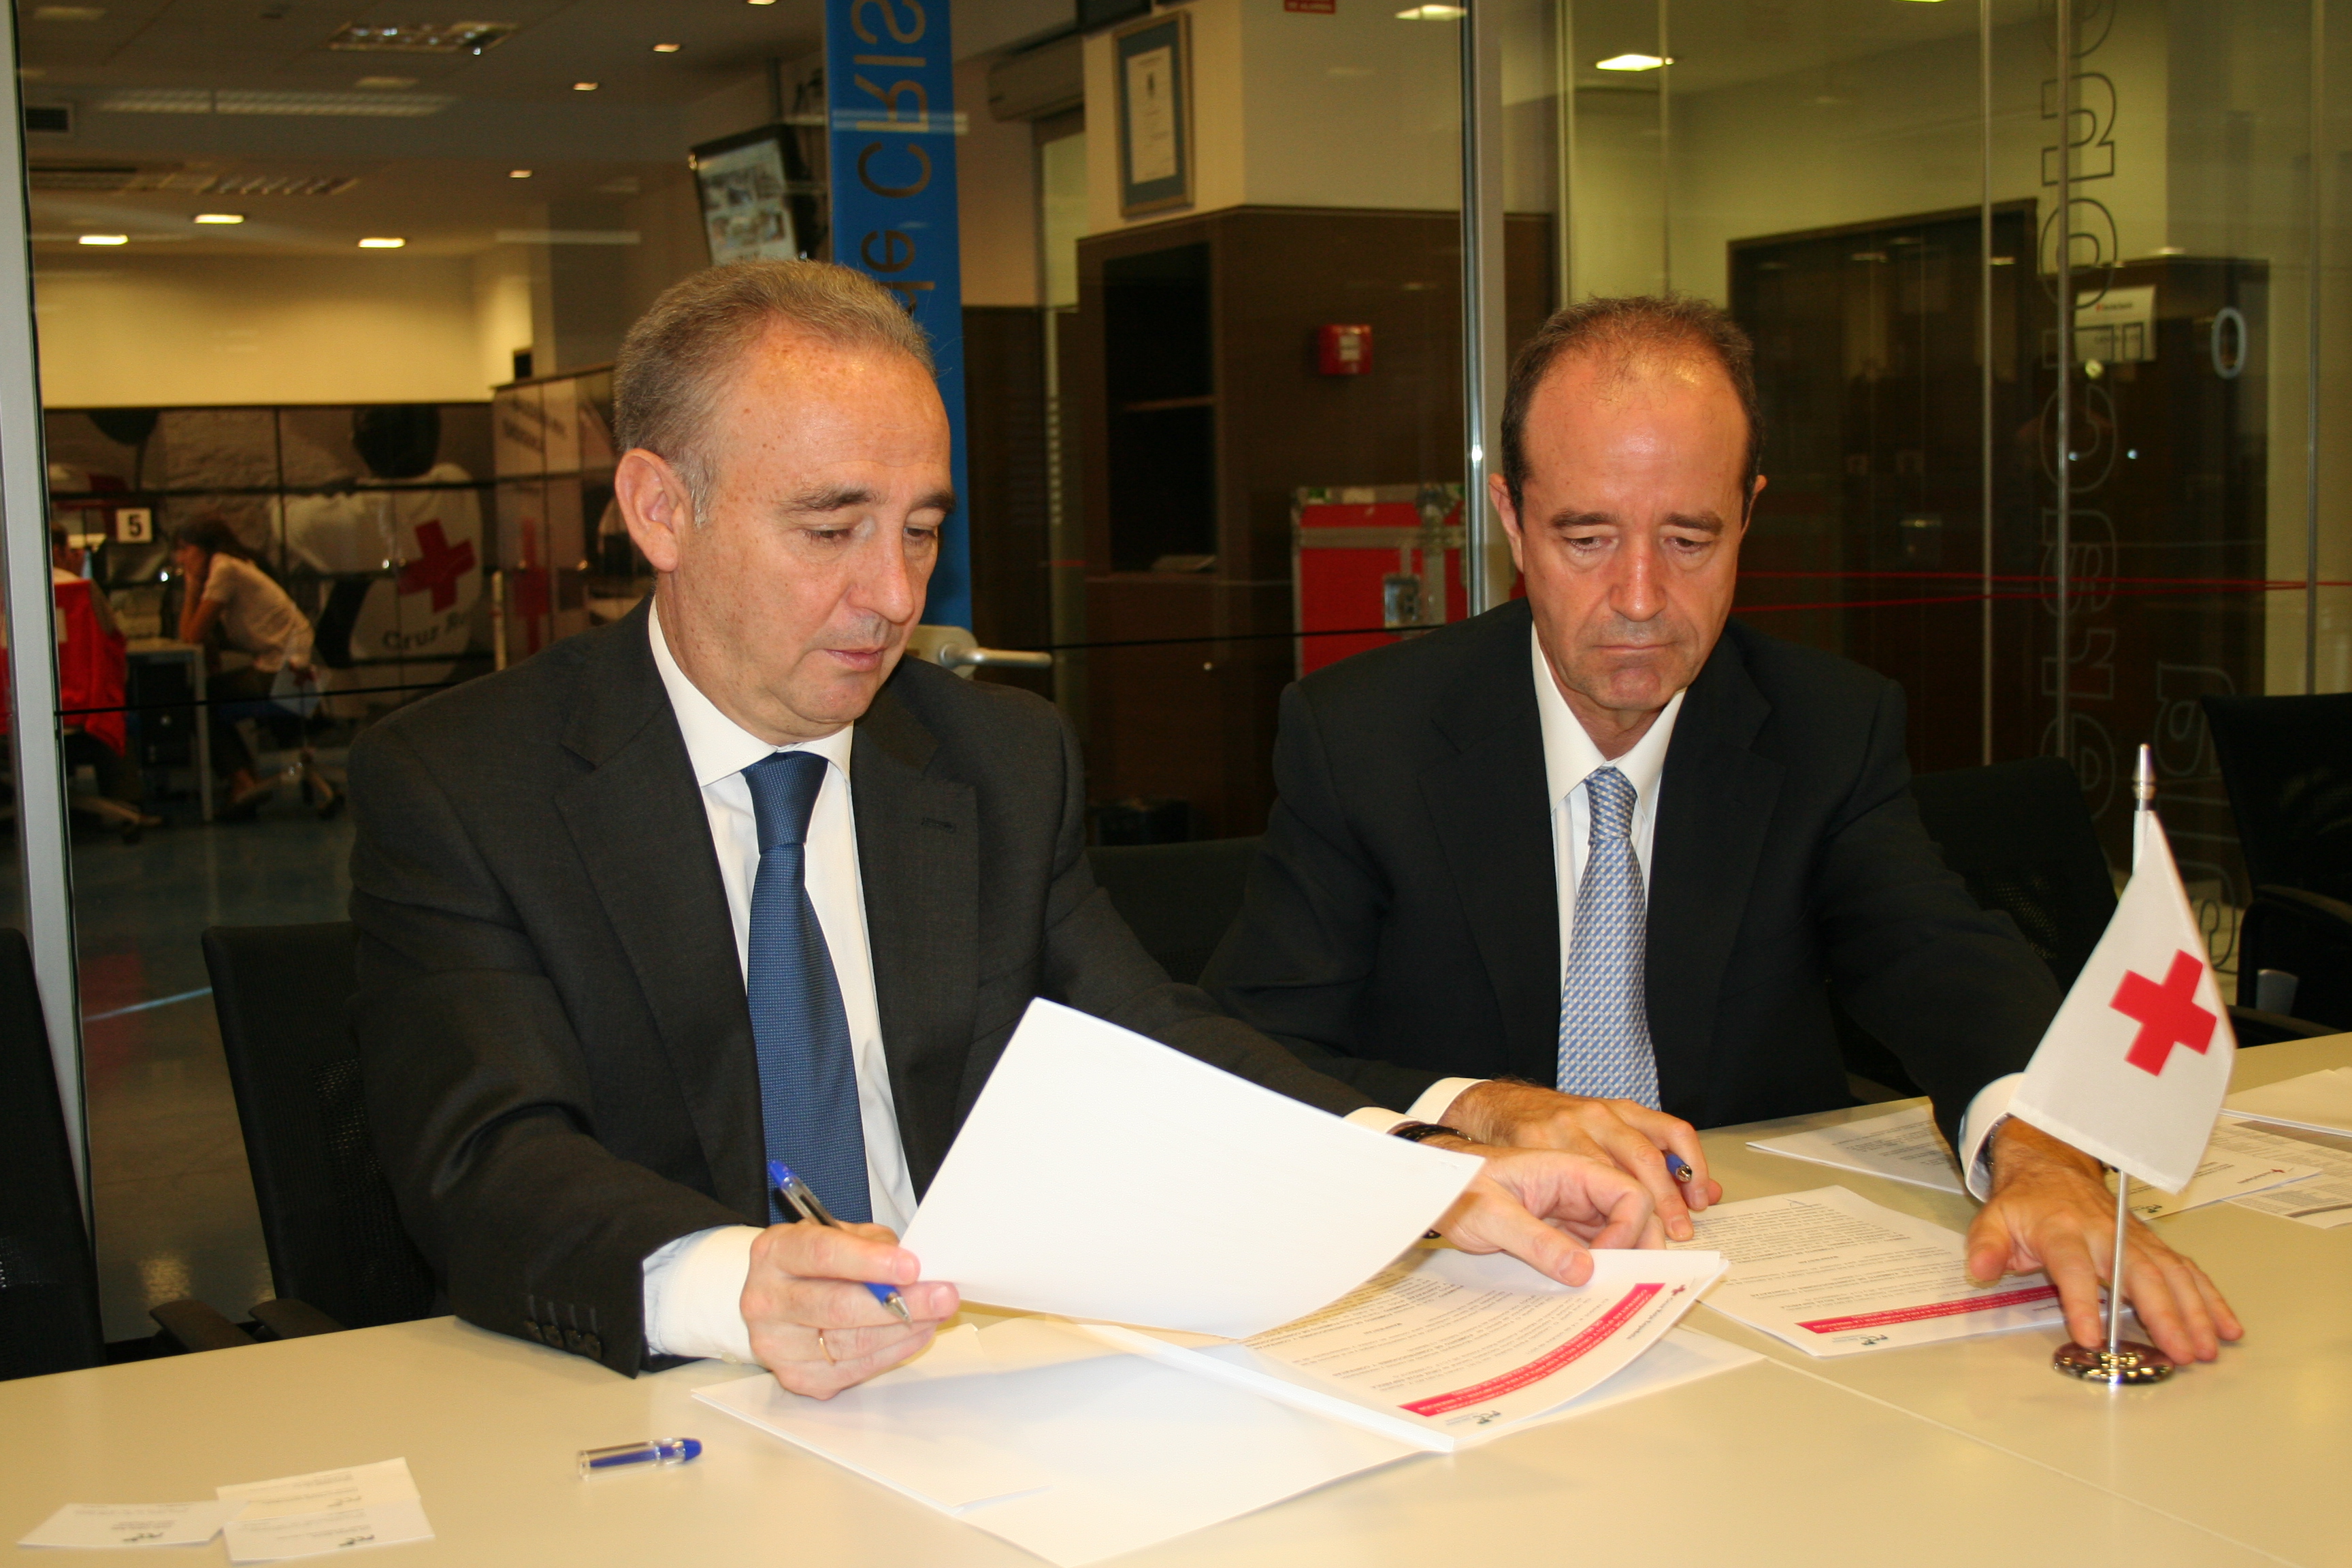 FCC signs a cooperation agreement with the Red Cross